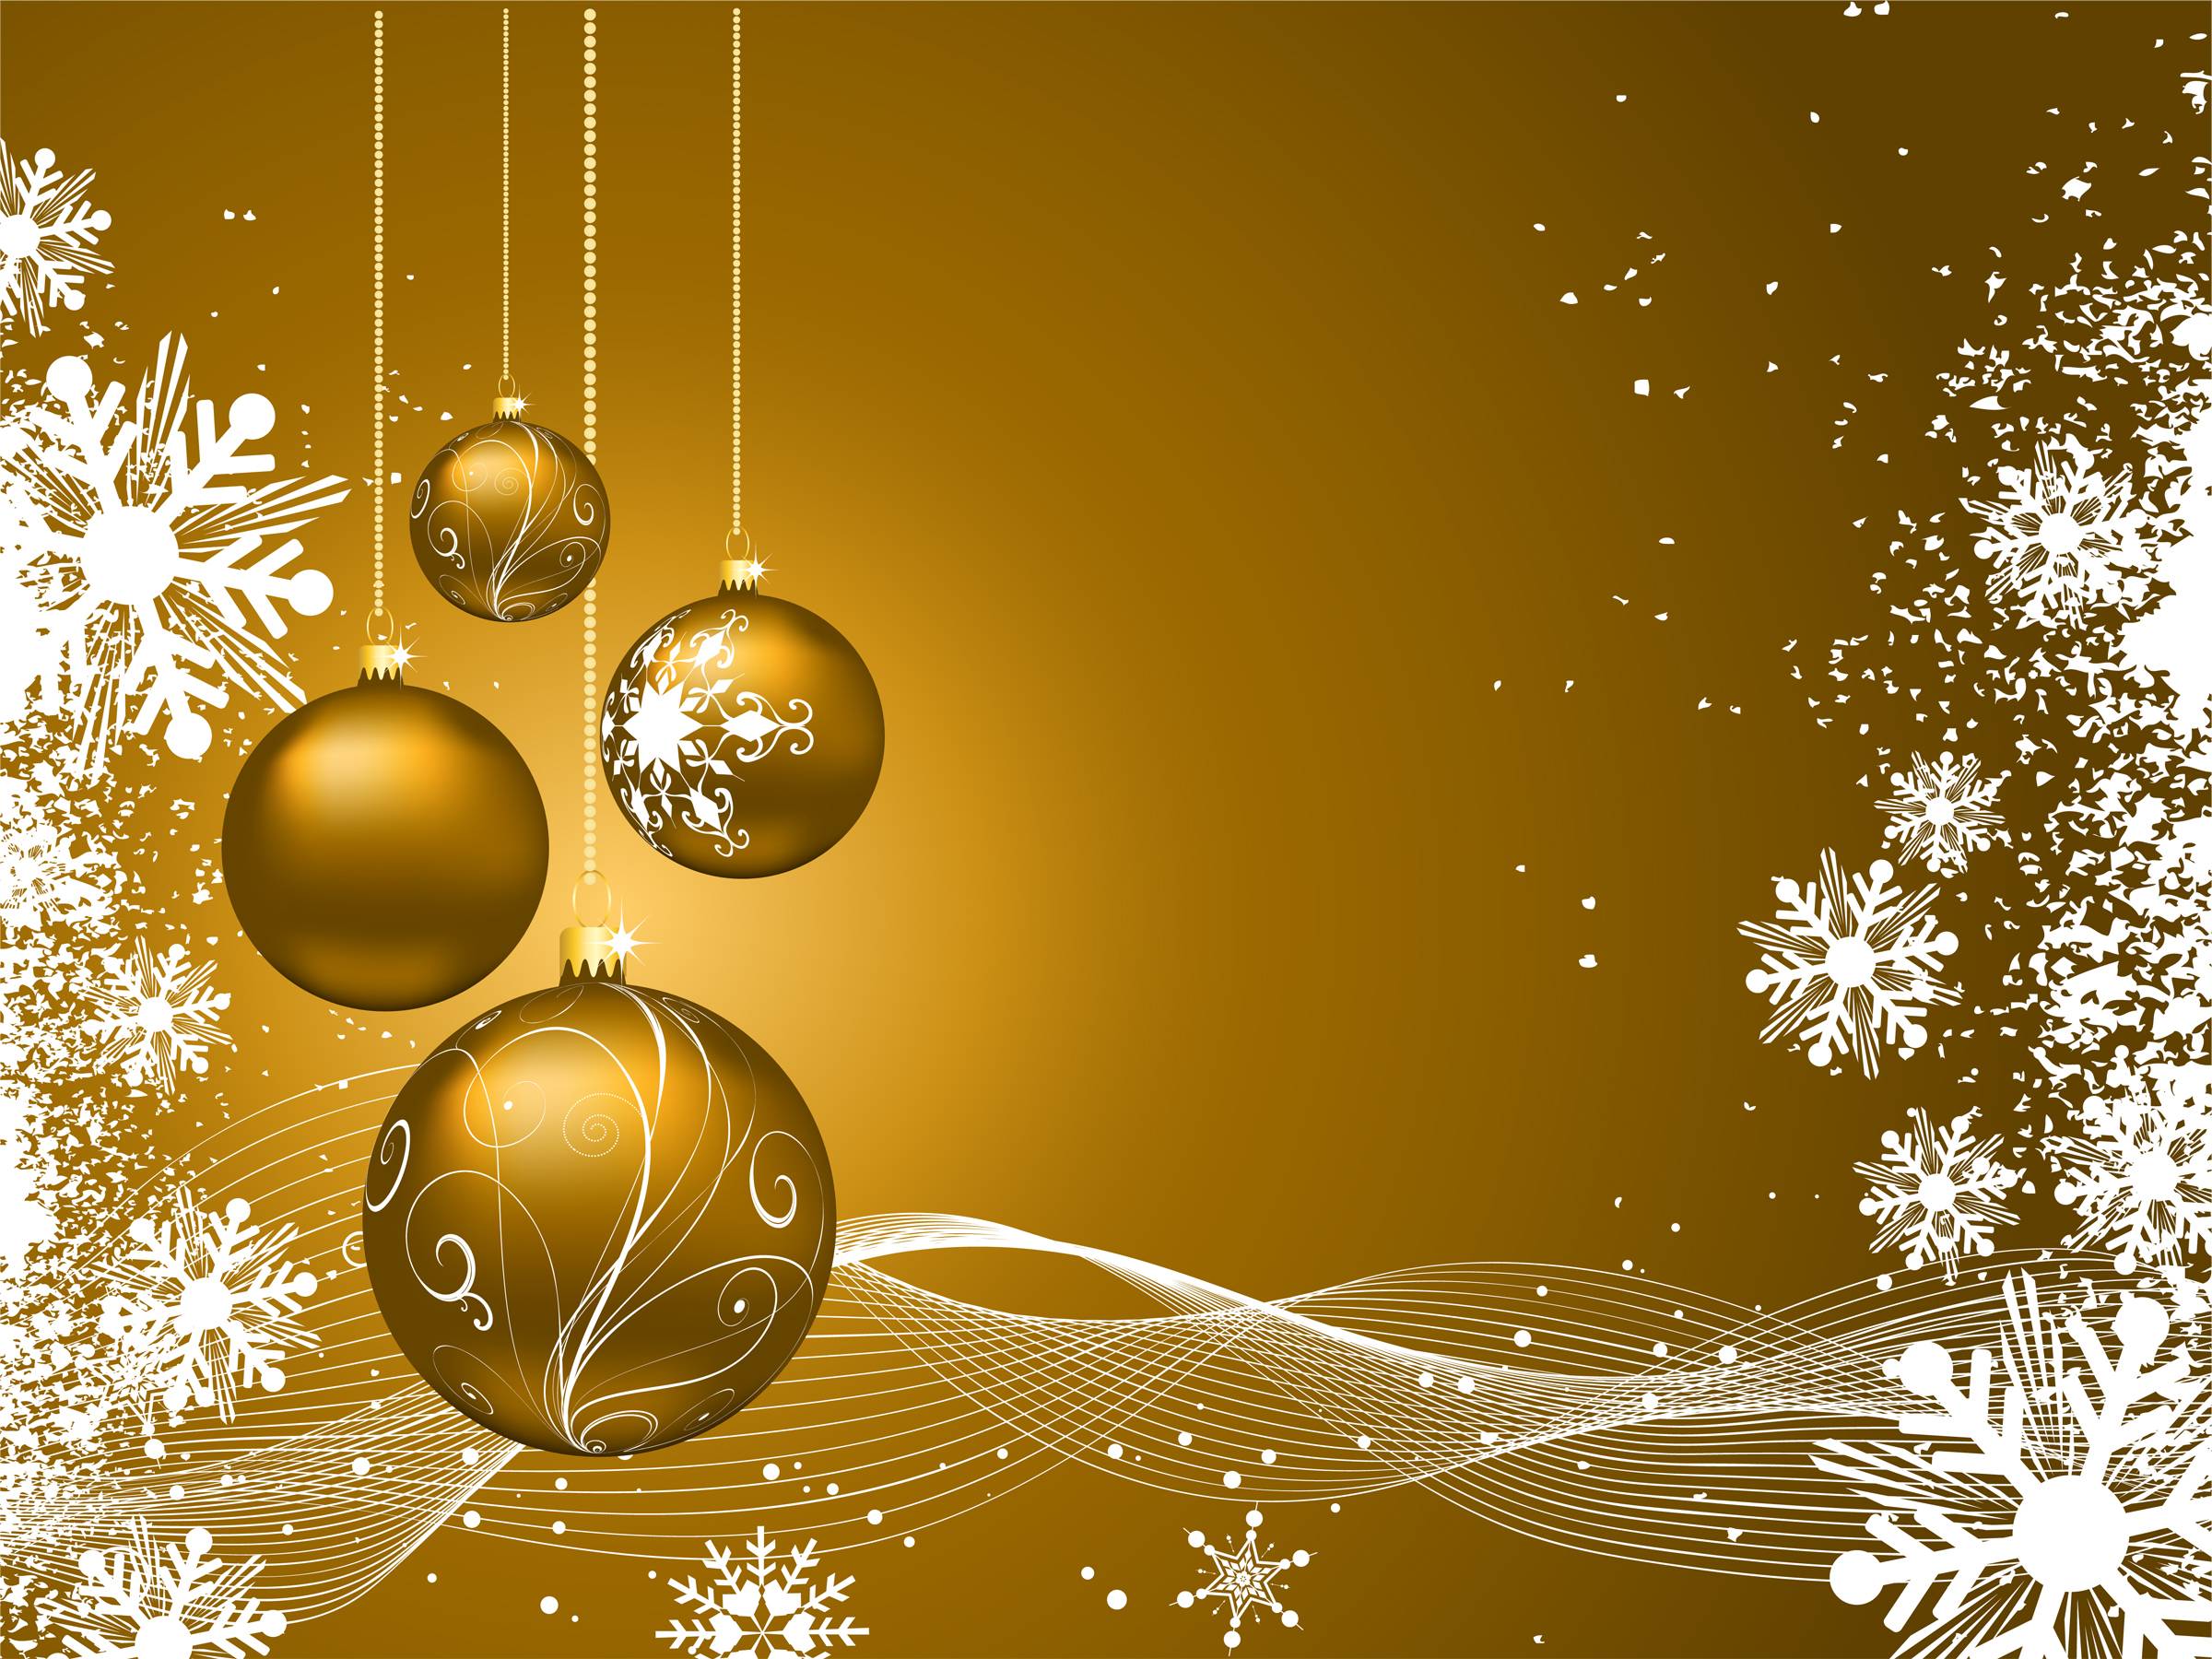 Spread joy with Christmas Wallpaper Yellow high-quality and free download